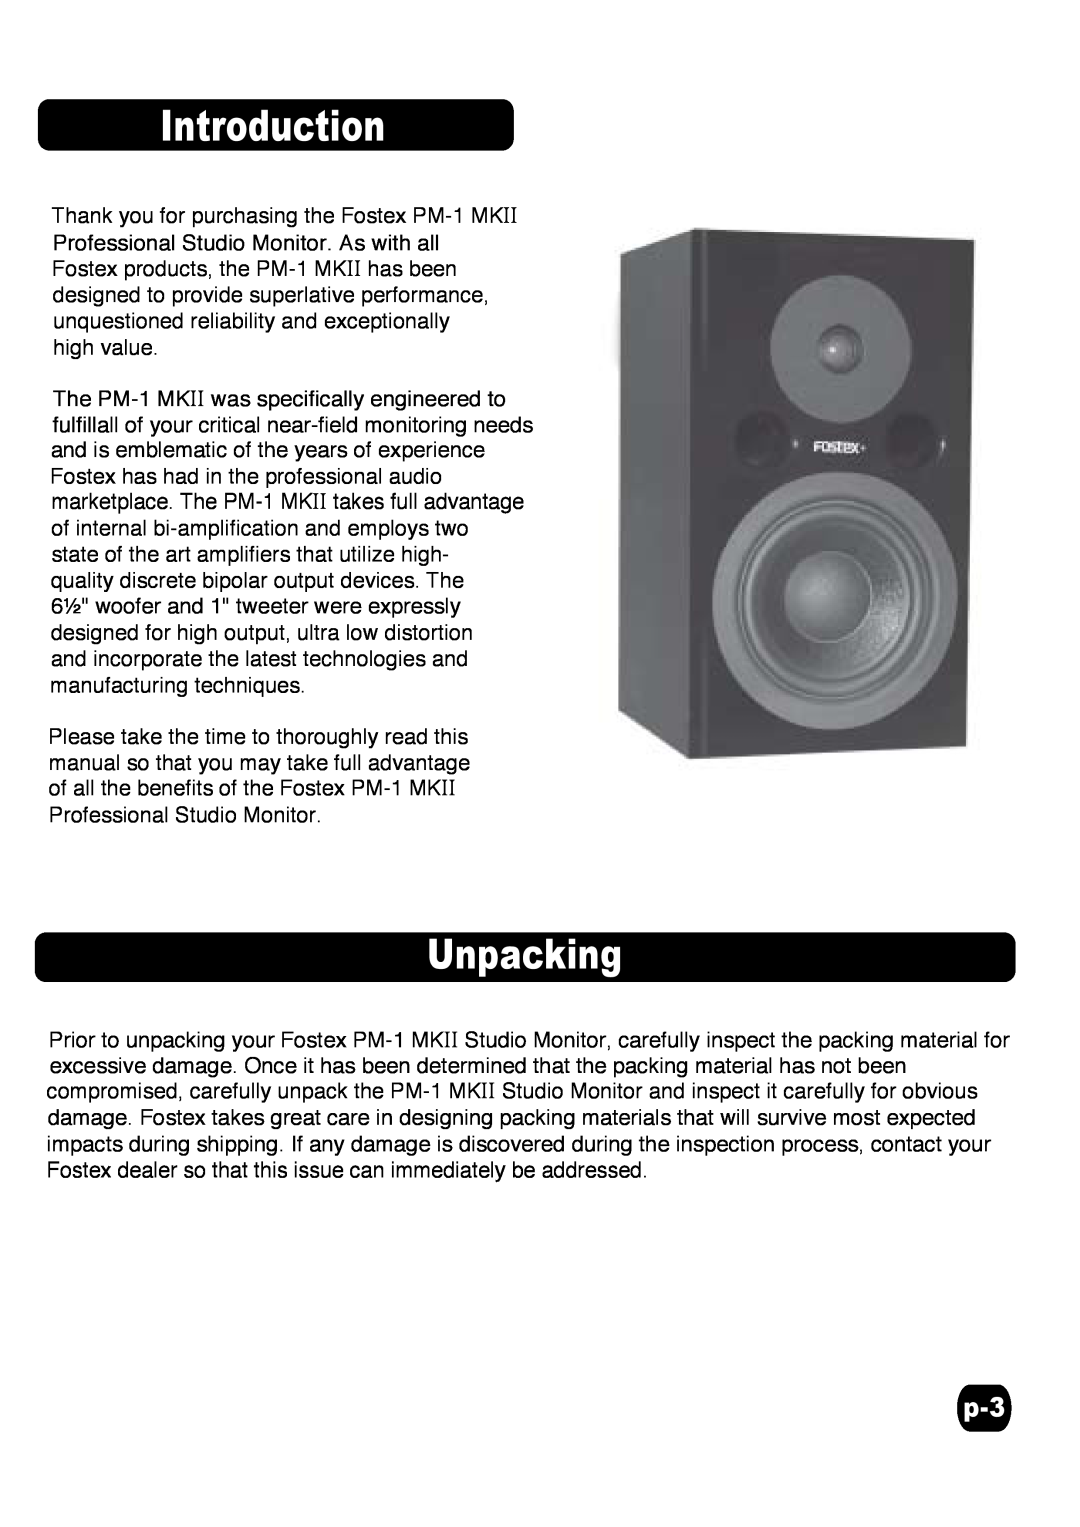 Fostex PM-1MKII specifications Unpacking, Introduction 